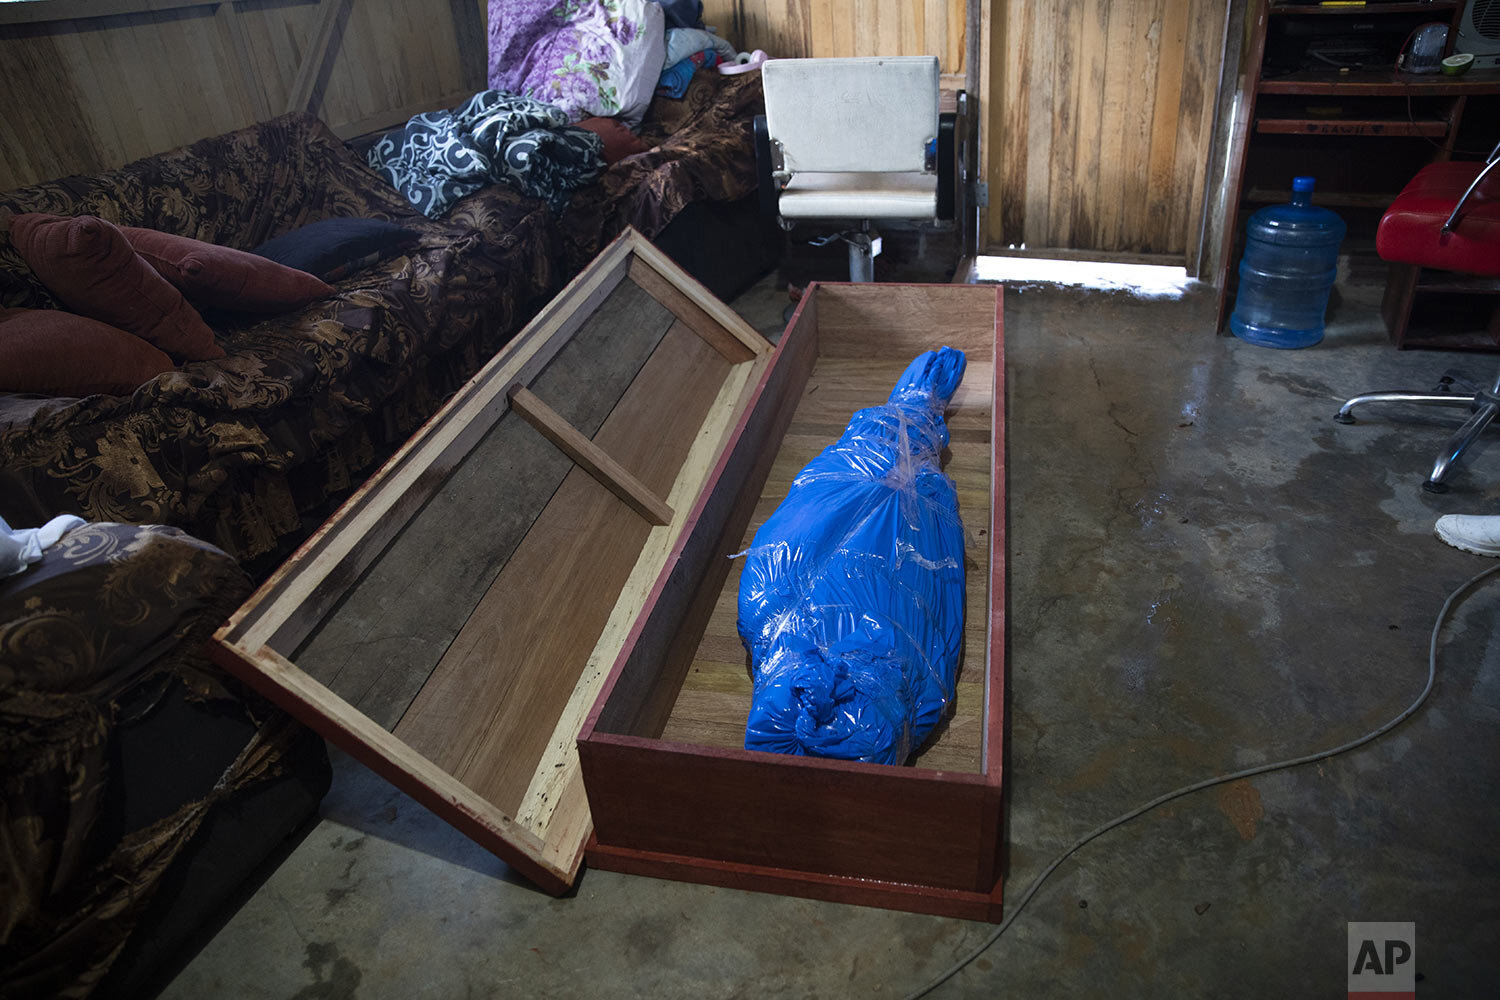  Corazona PenaÕs body lies in a coffin, wrapped in plastic by a Peruvian COVID-19 specialized government team, in Pucallpa, in Peru’s Ucayali region, Tuesday, Sept. 29, 2020. (AP Photo/Rodrigo Abd) 